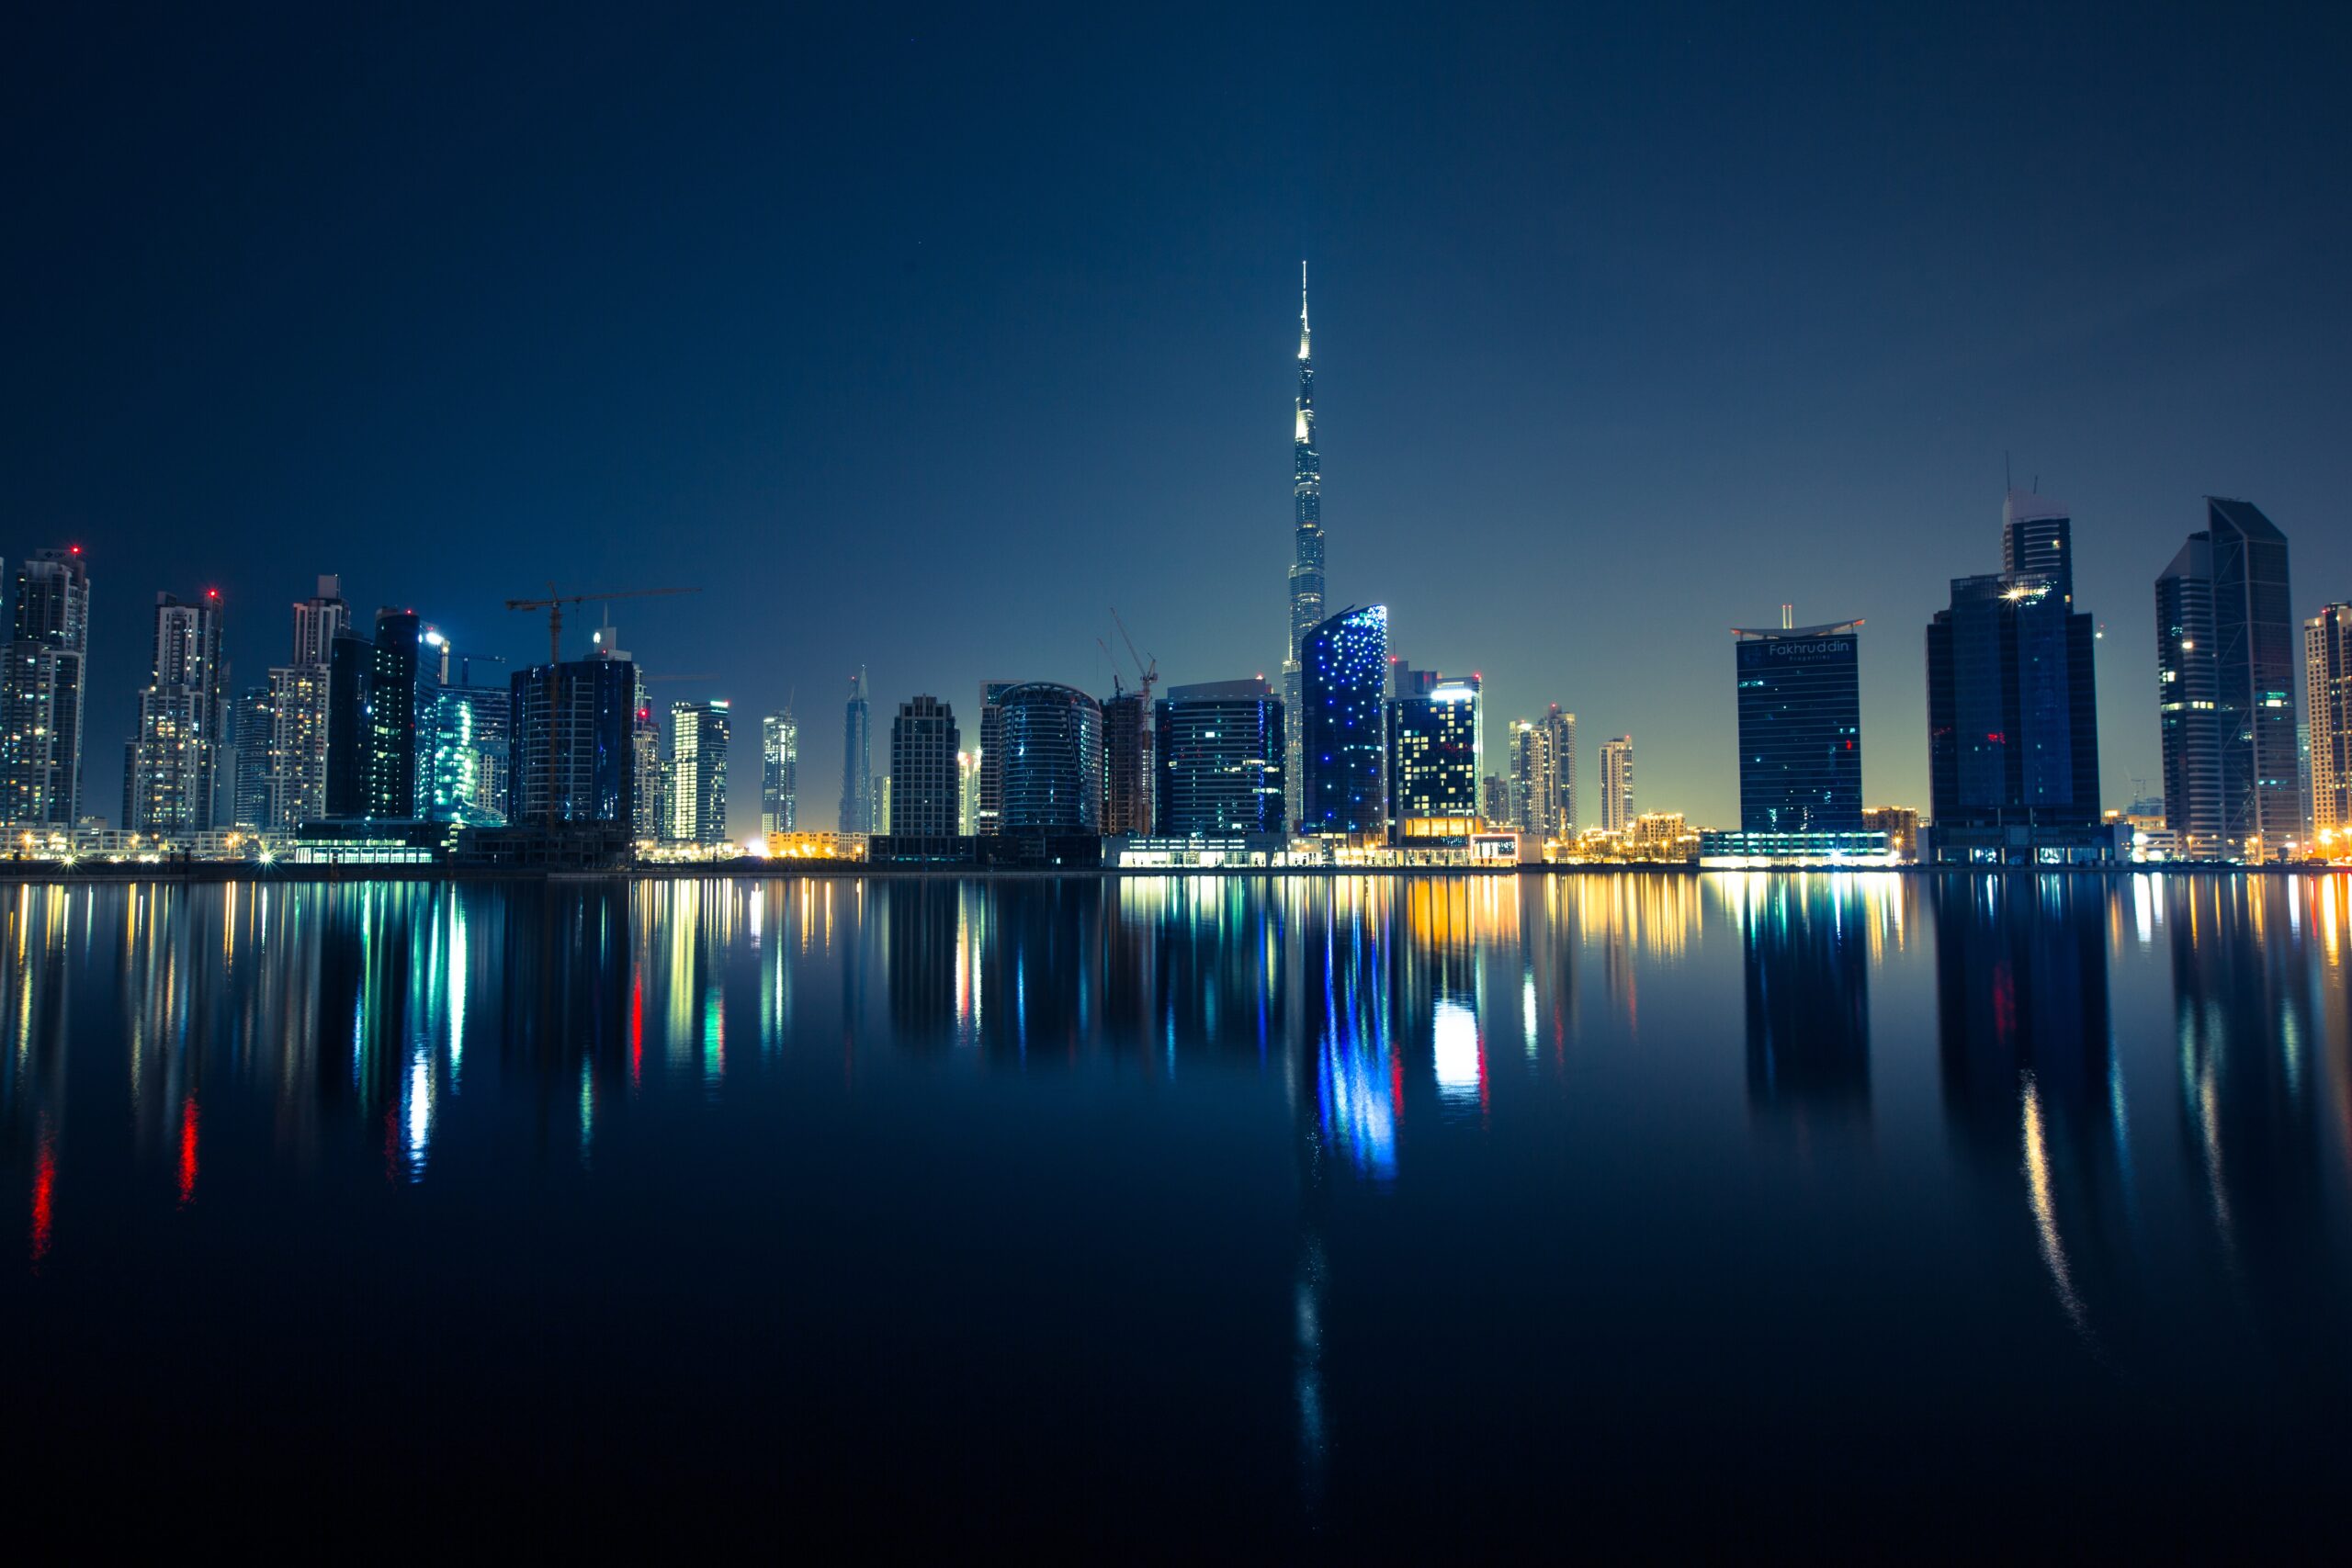 Dubai: A Mirage Turned Oasis in the Desert